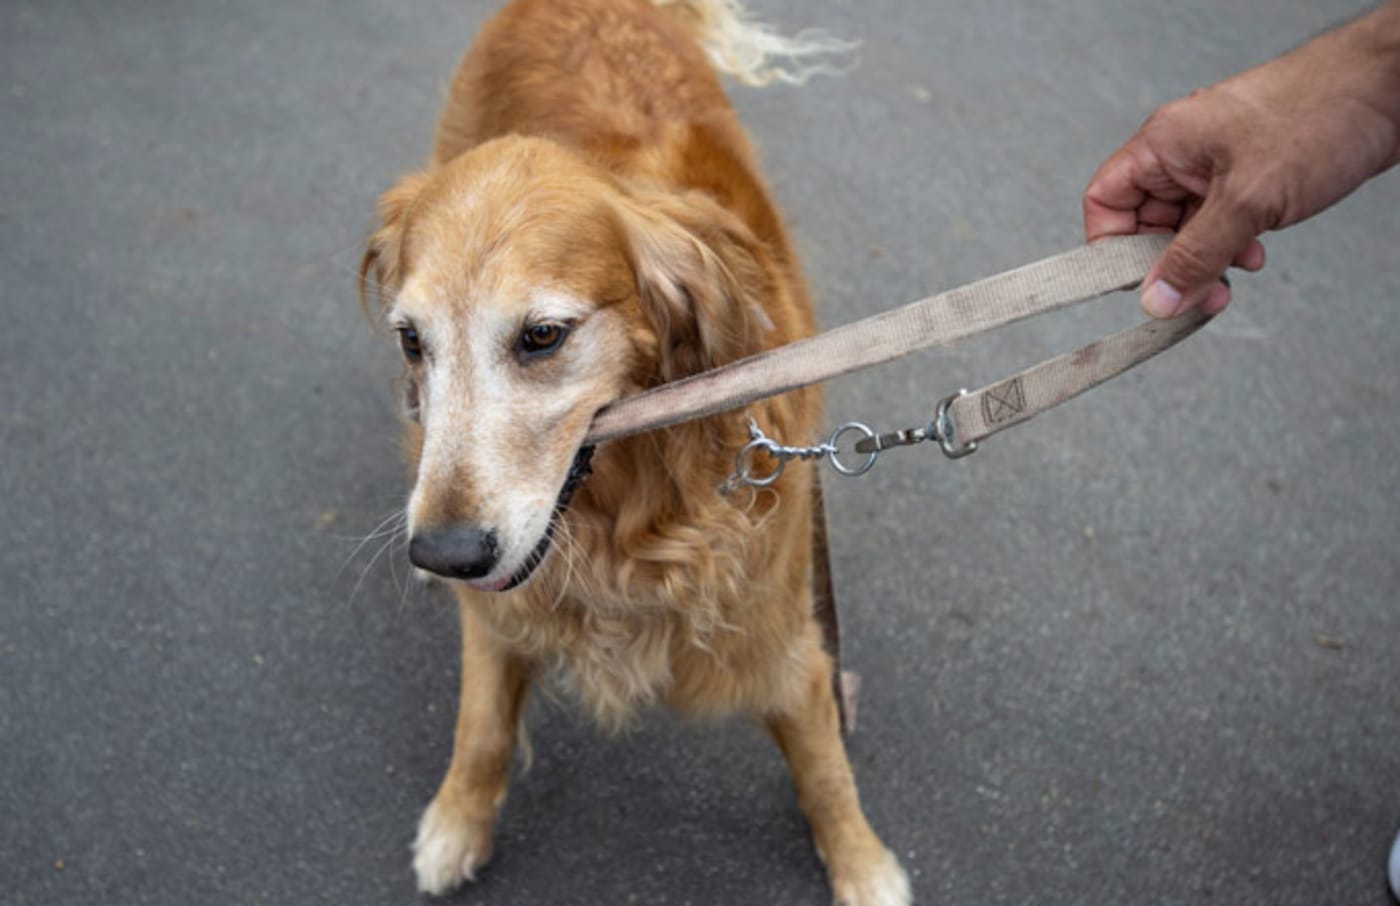 A golden retriever plays tug of war with its leash.